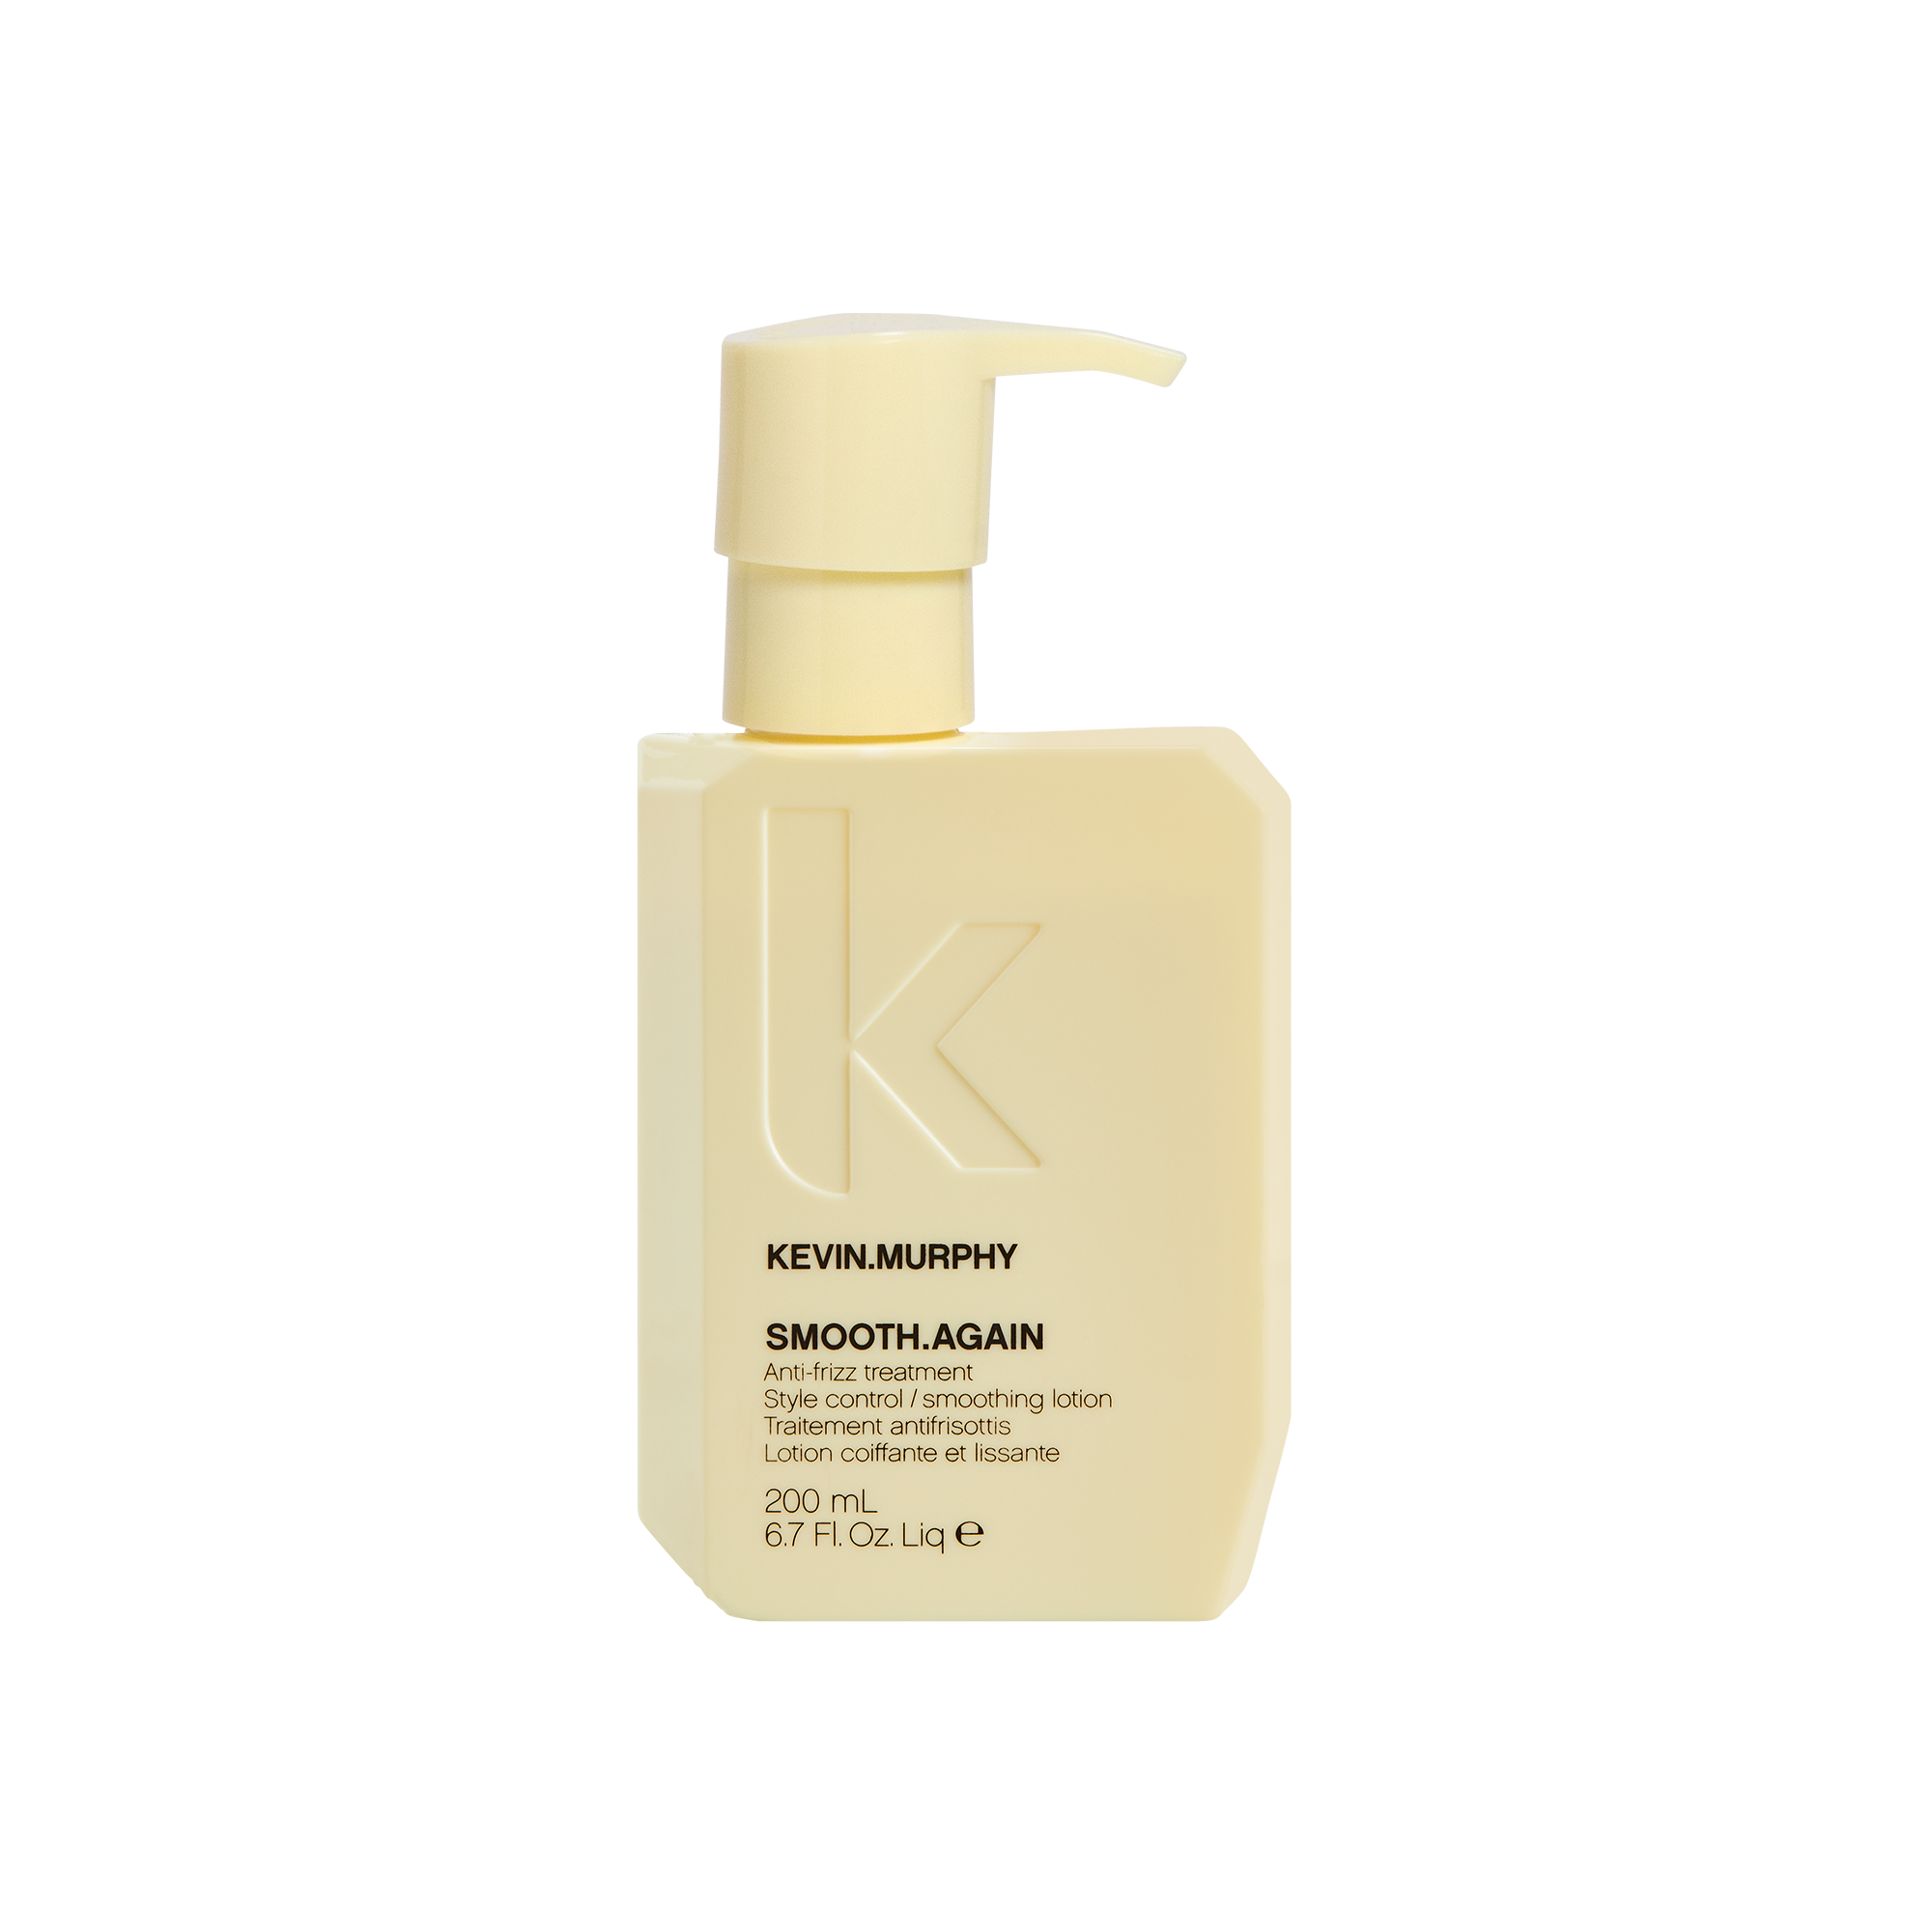 Kevin Murphy - Smooth.Again 200 ml.